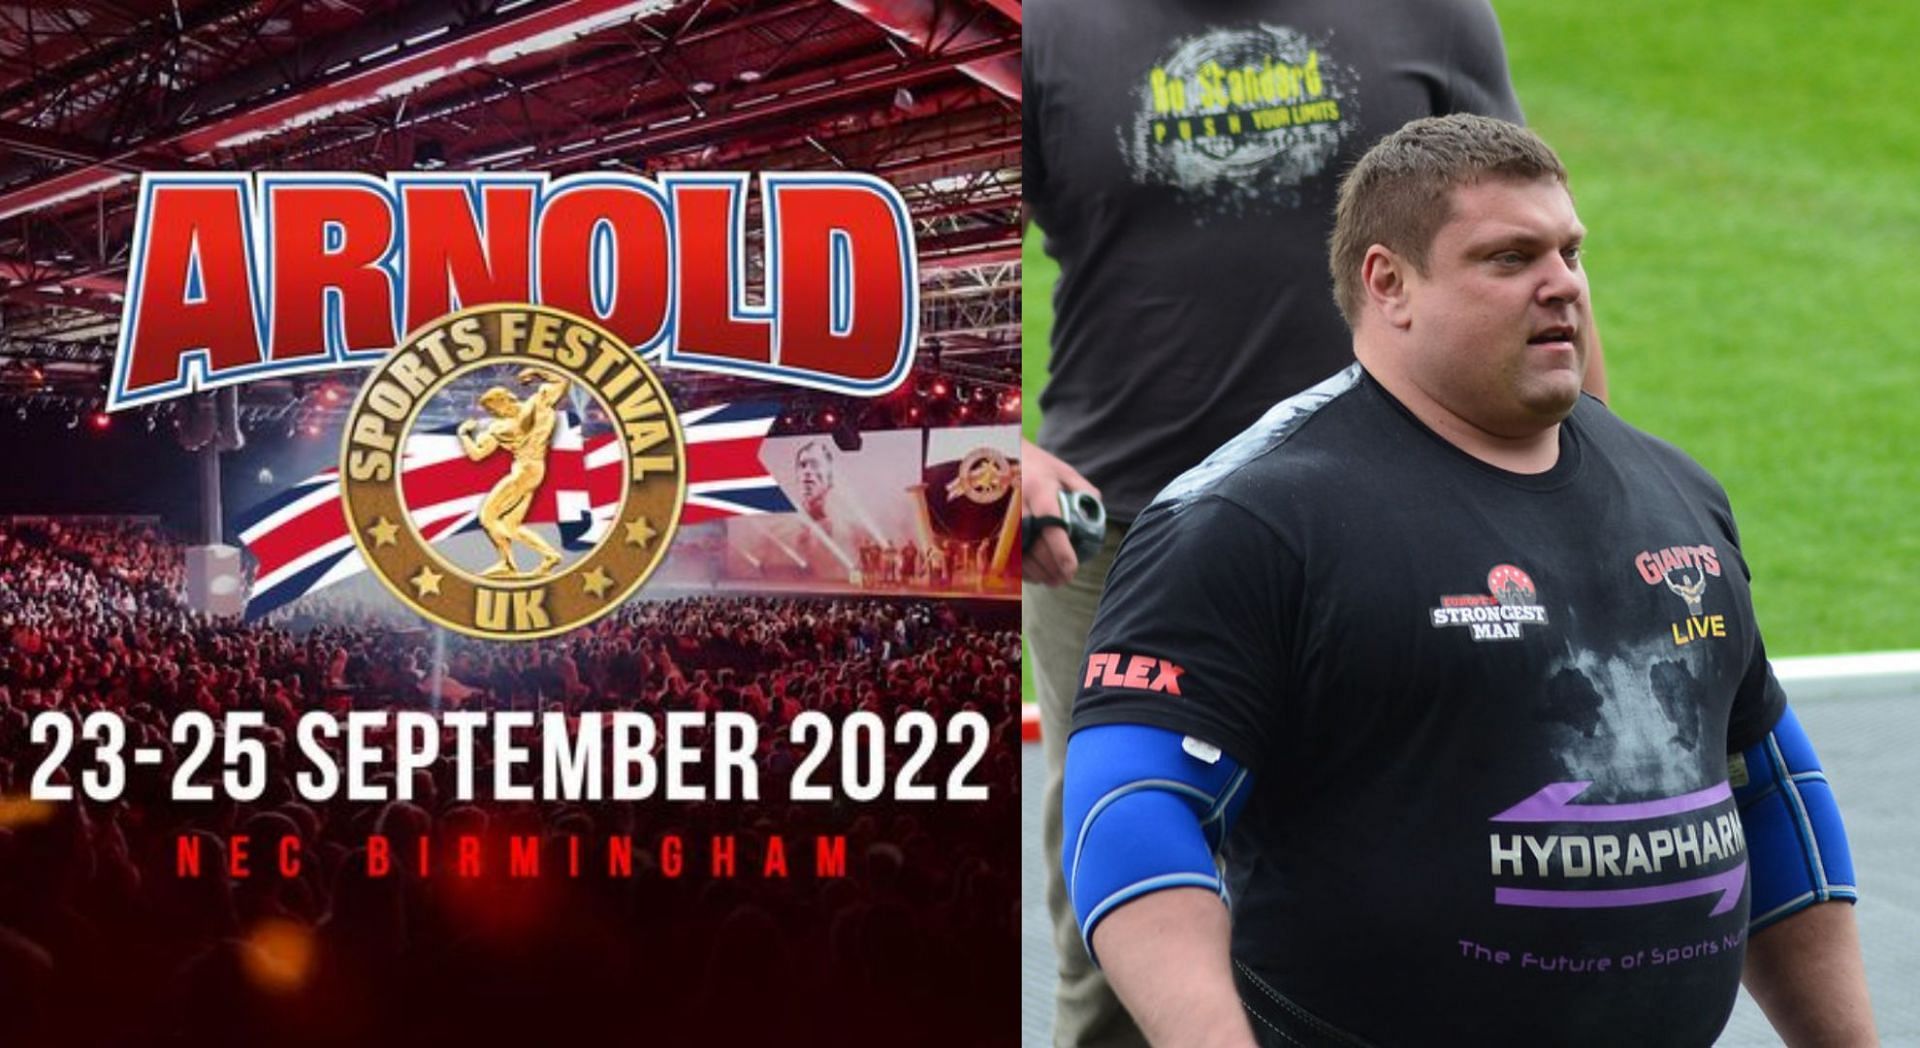 The 2022 Arnold Classic Strongman Roster - Complete List (Image via Facebook and Flickr)